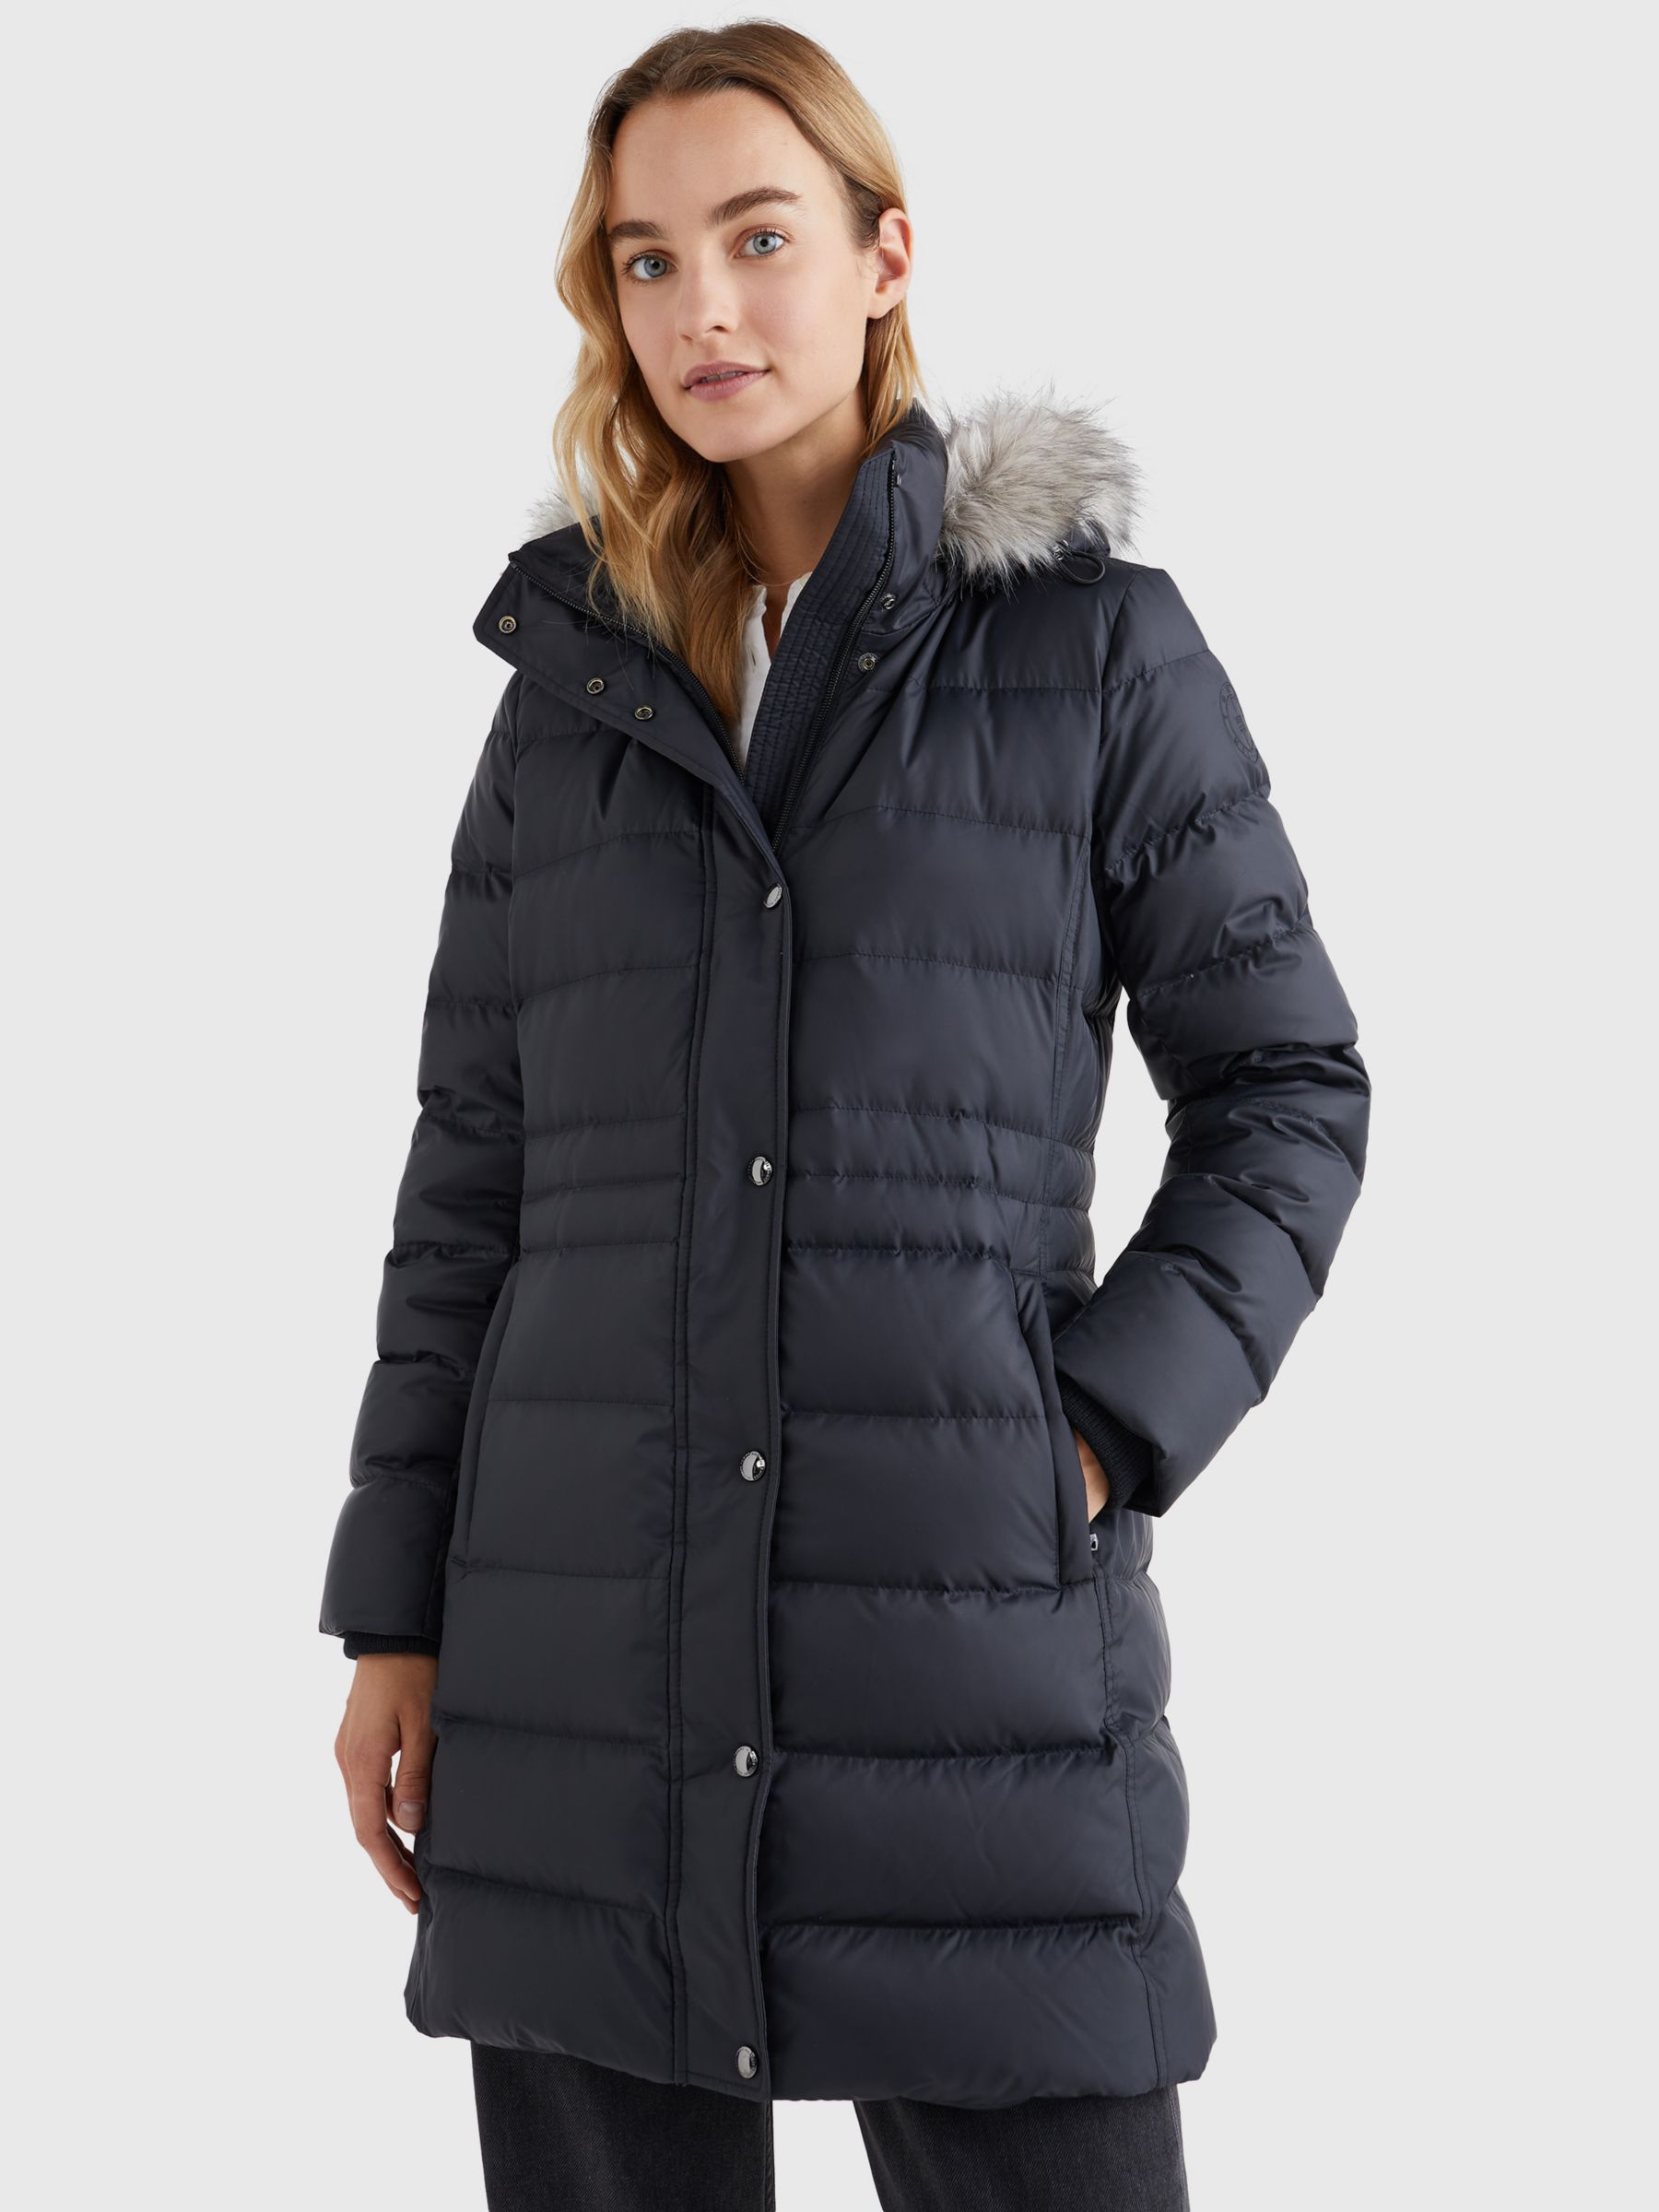 Tommy Hilfiger Tyra Down Padded Coat, Black at John Lewis & Partners